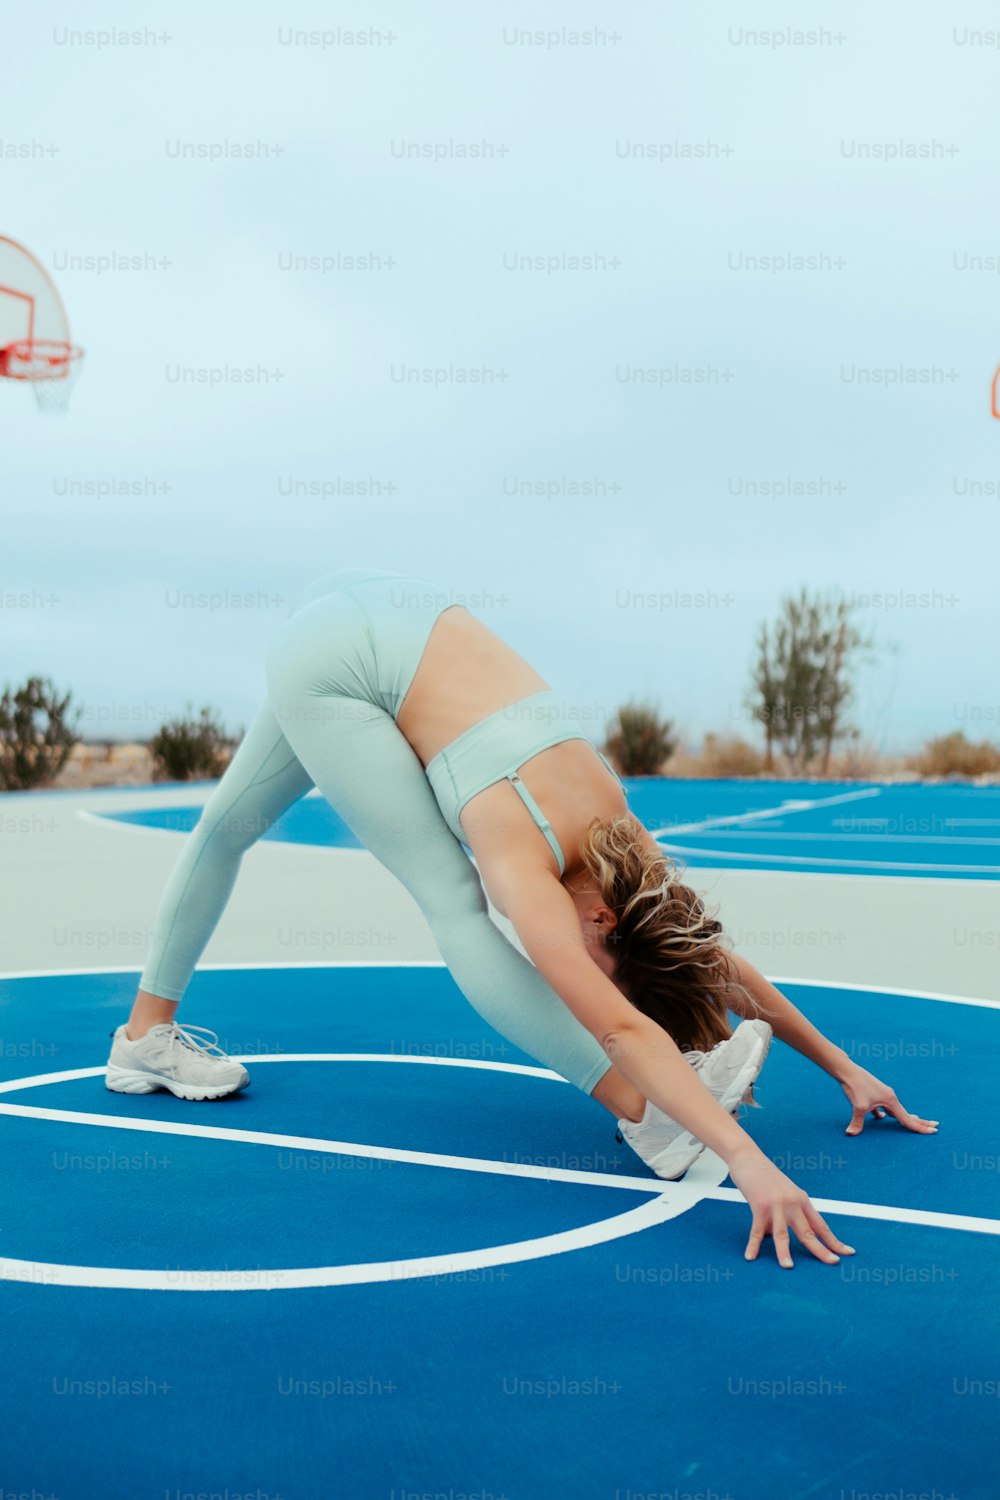 a woman is doing a handstand on a basketball court